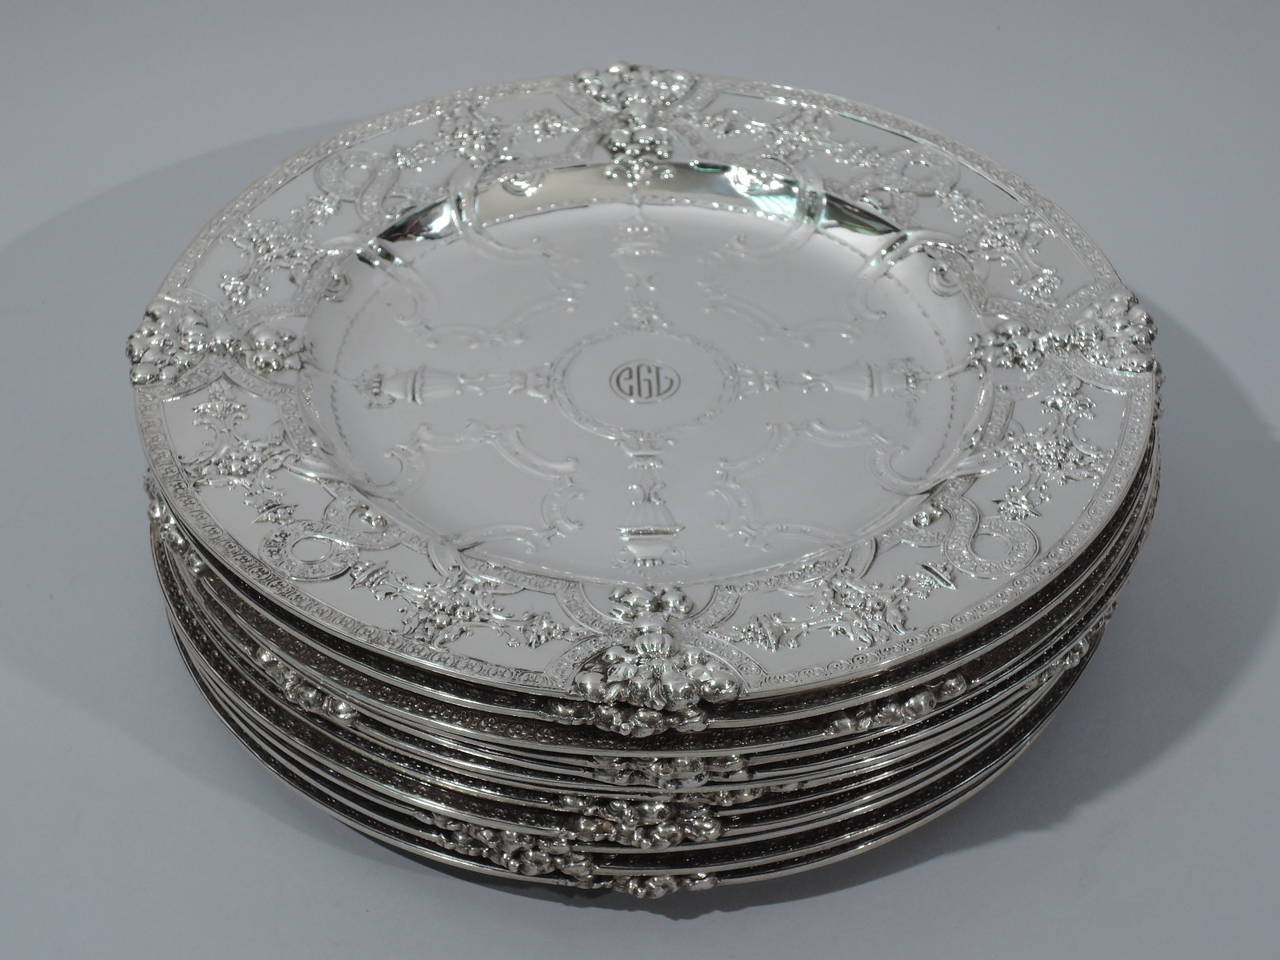 Set of 12 Renaissance-Revival sterling silver service plates. Made by historic Tiffany & Co. in New York. Each: circular with deep well. Raised ornament includes strapwork and rosette frames and borders. Also, covered vases, and bunches of fruits